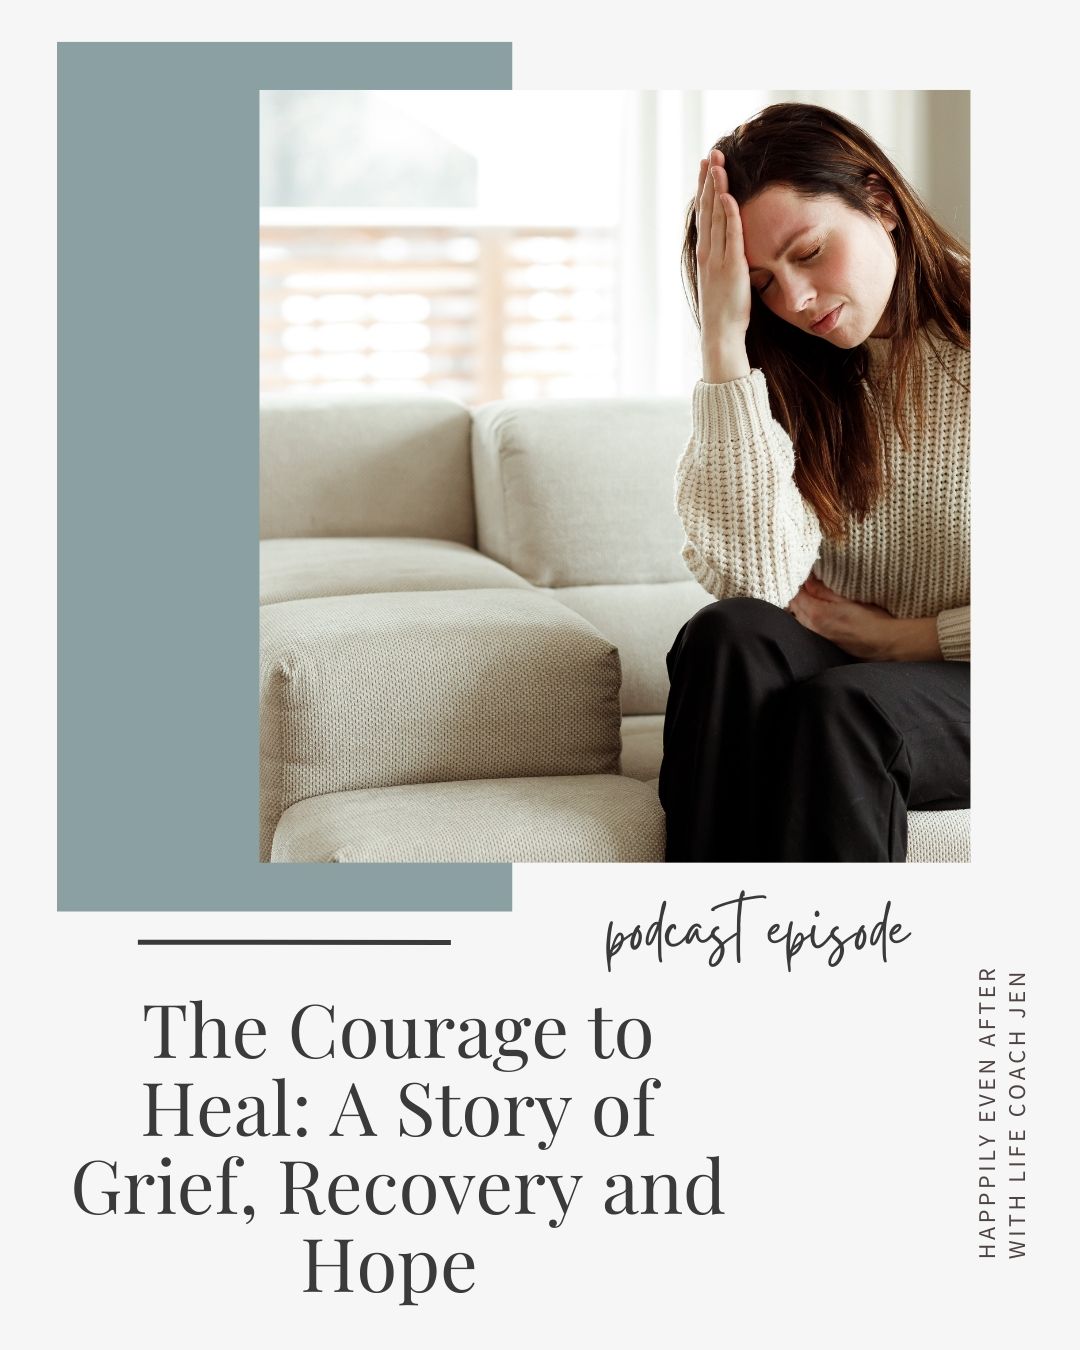 Promotional image for a podcast episode titled "the courage to heal: a story of grief, recovery and hope," featuring a woman sitting on a couch, touching her forehead in a thoughtful pose.